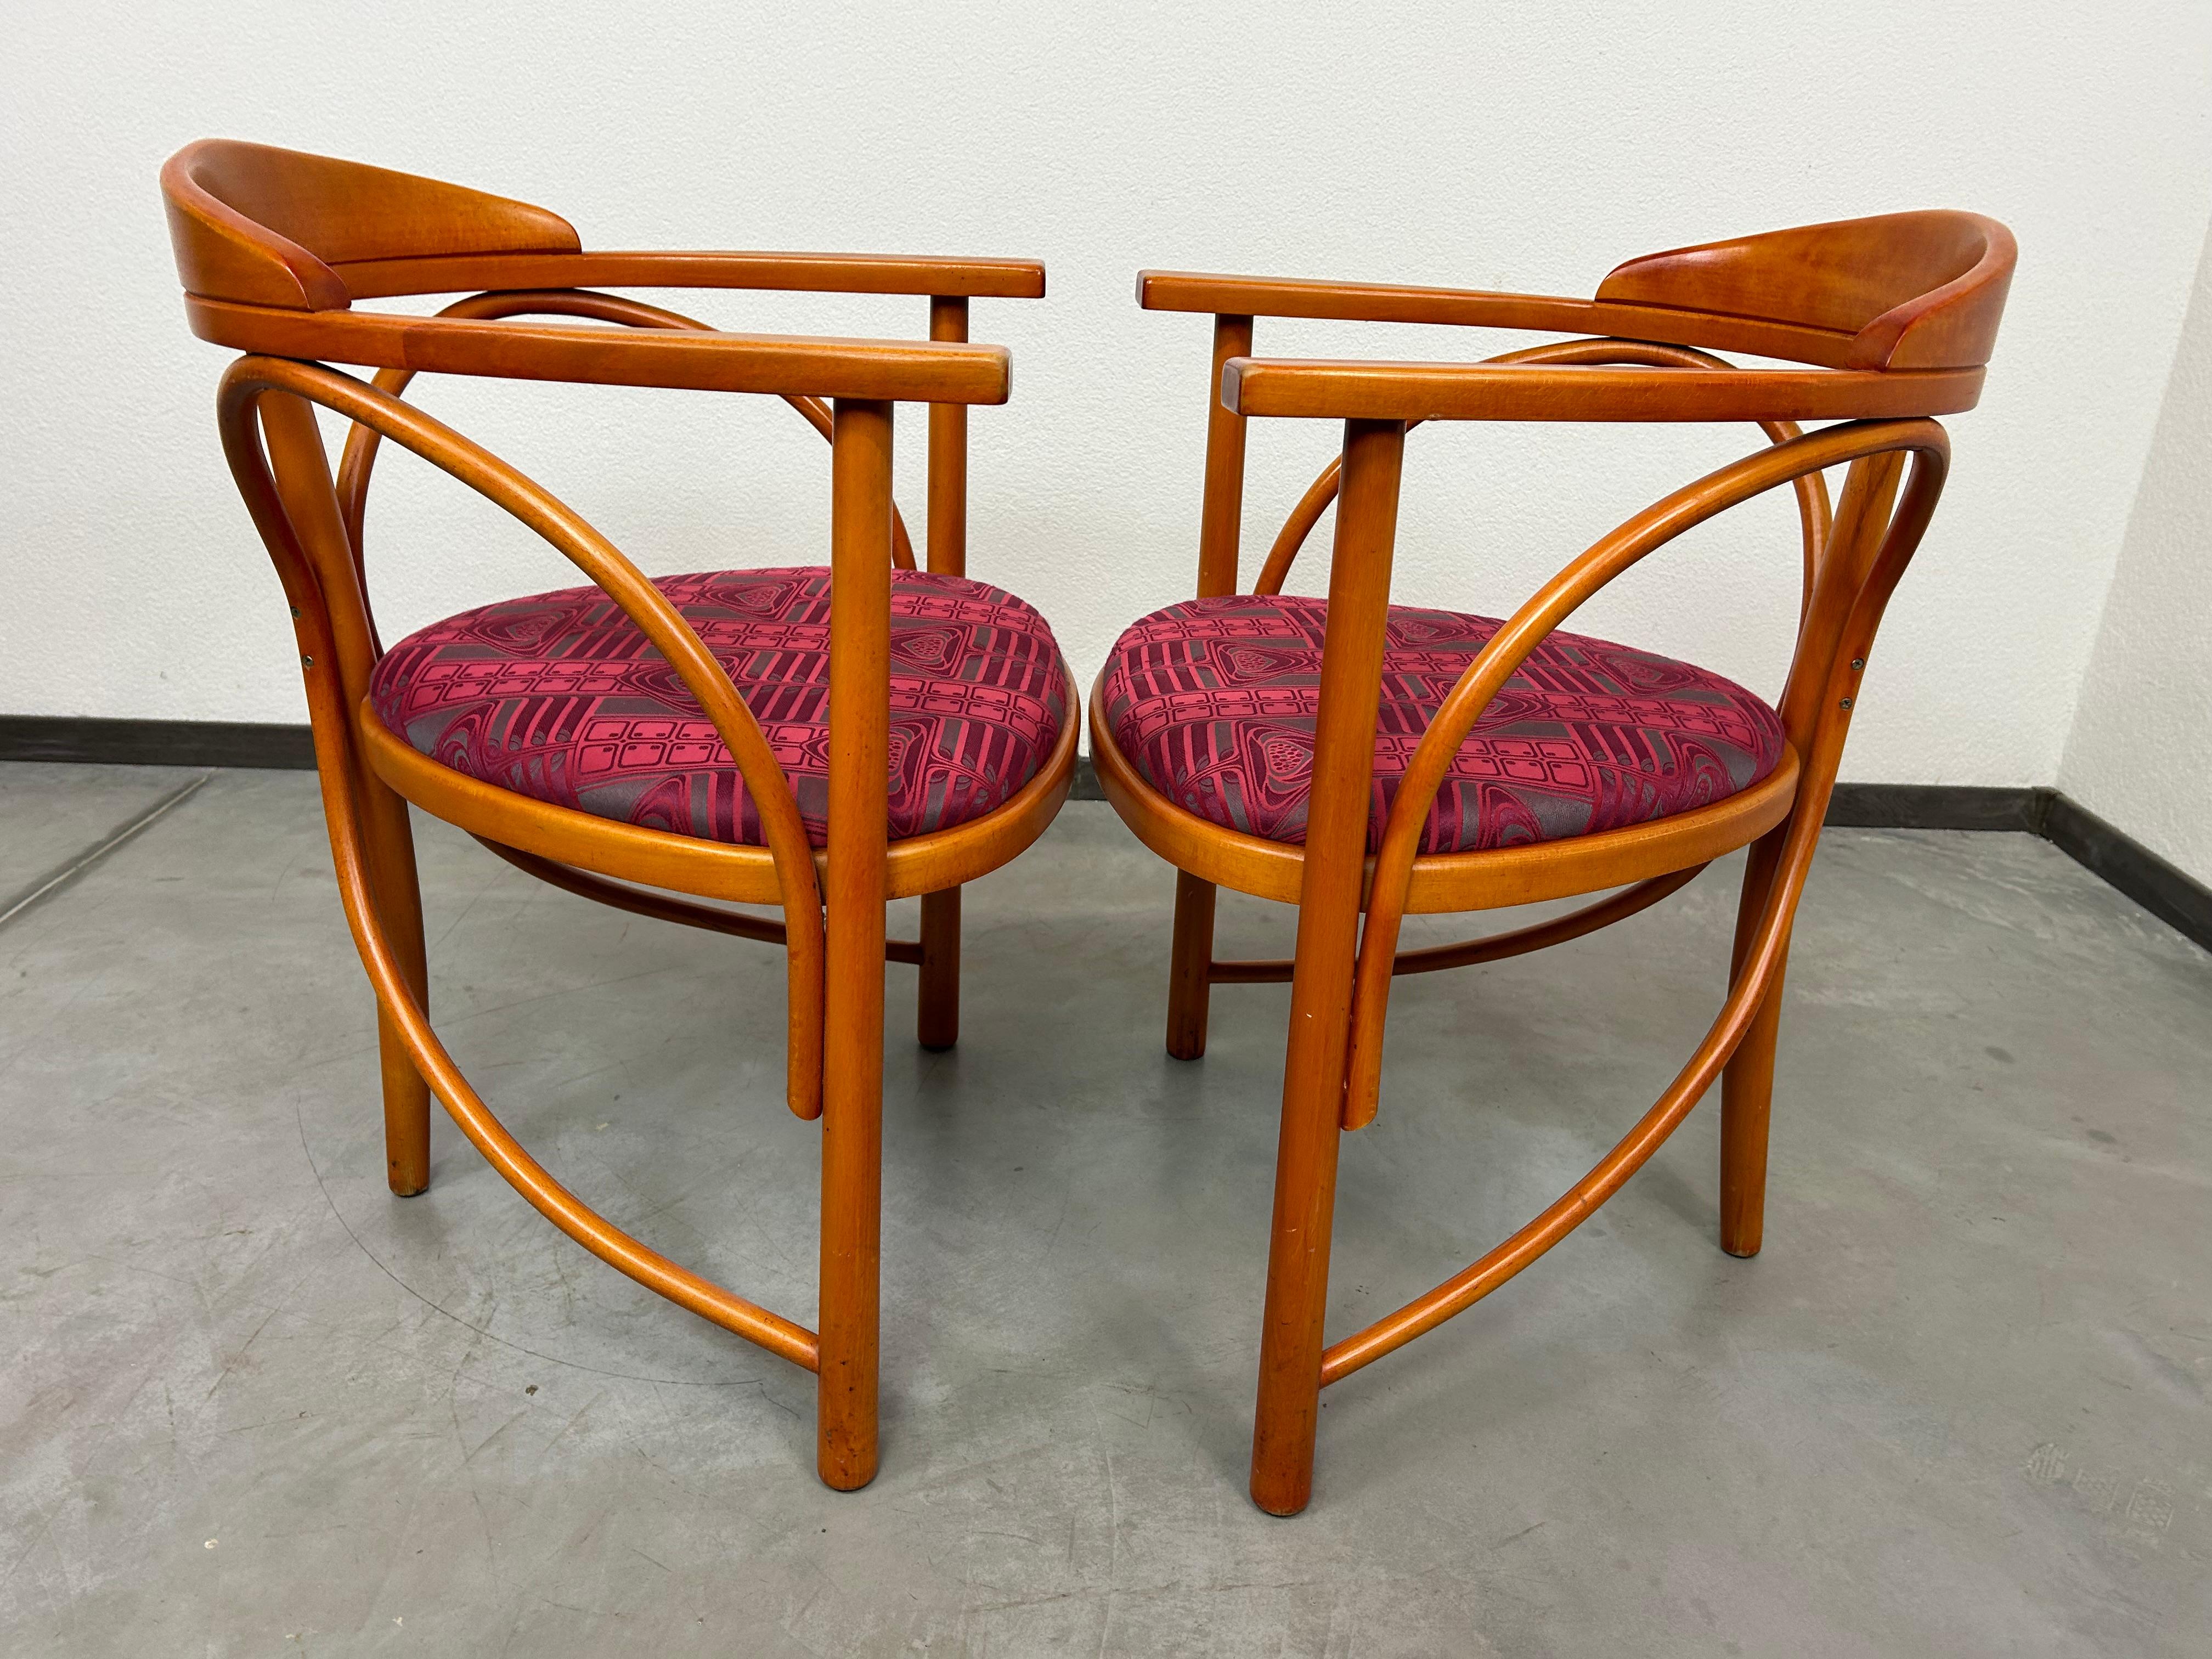 Secession tripod chairs no.81 by Thonet In Good Condition For Sale In Banská Štiavnica, SK